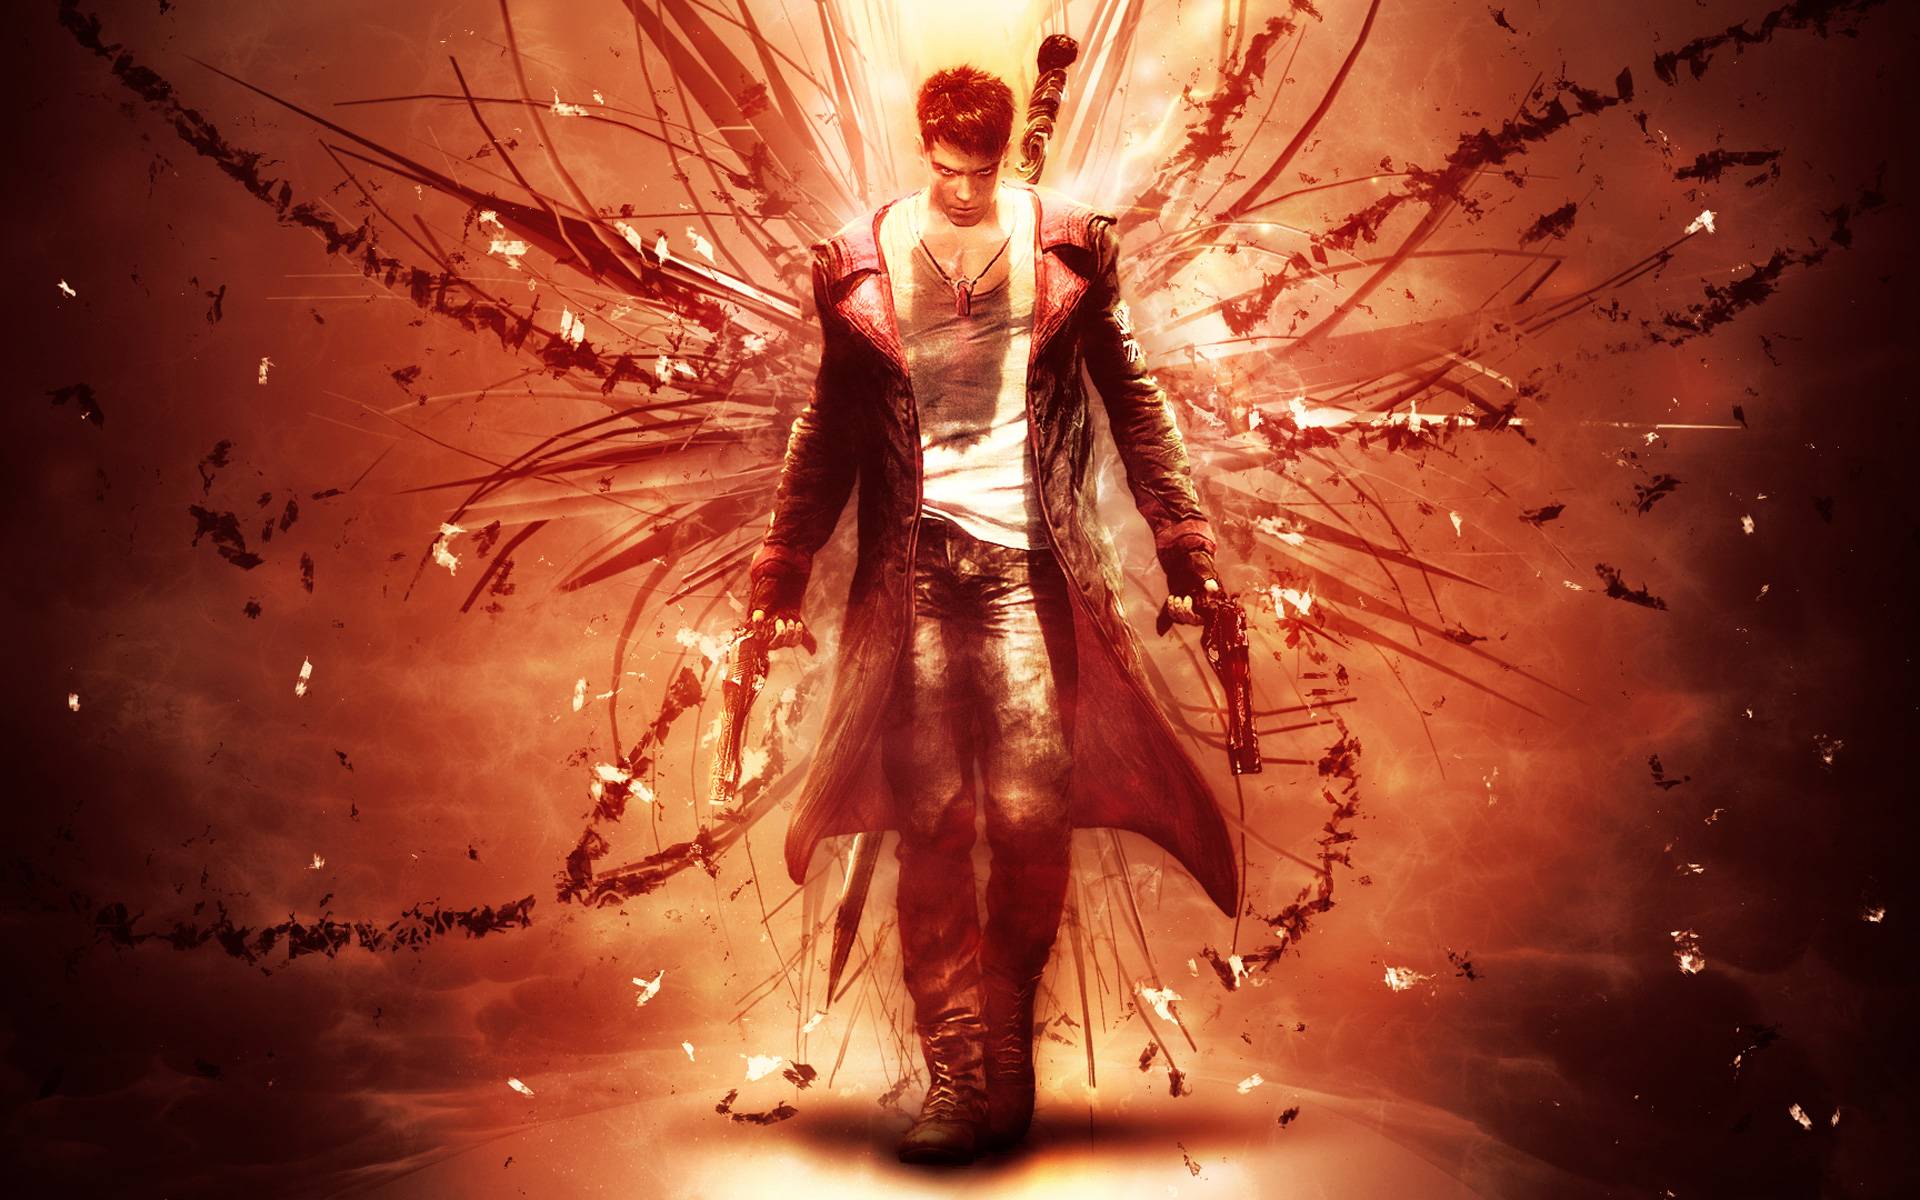 Dmc Devil May Cry Wallpaper In HD Gamingbolt Video Game News